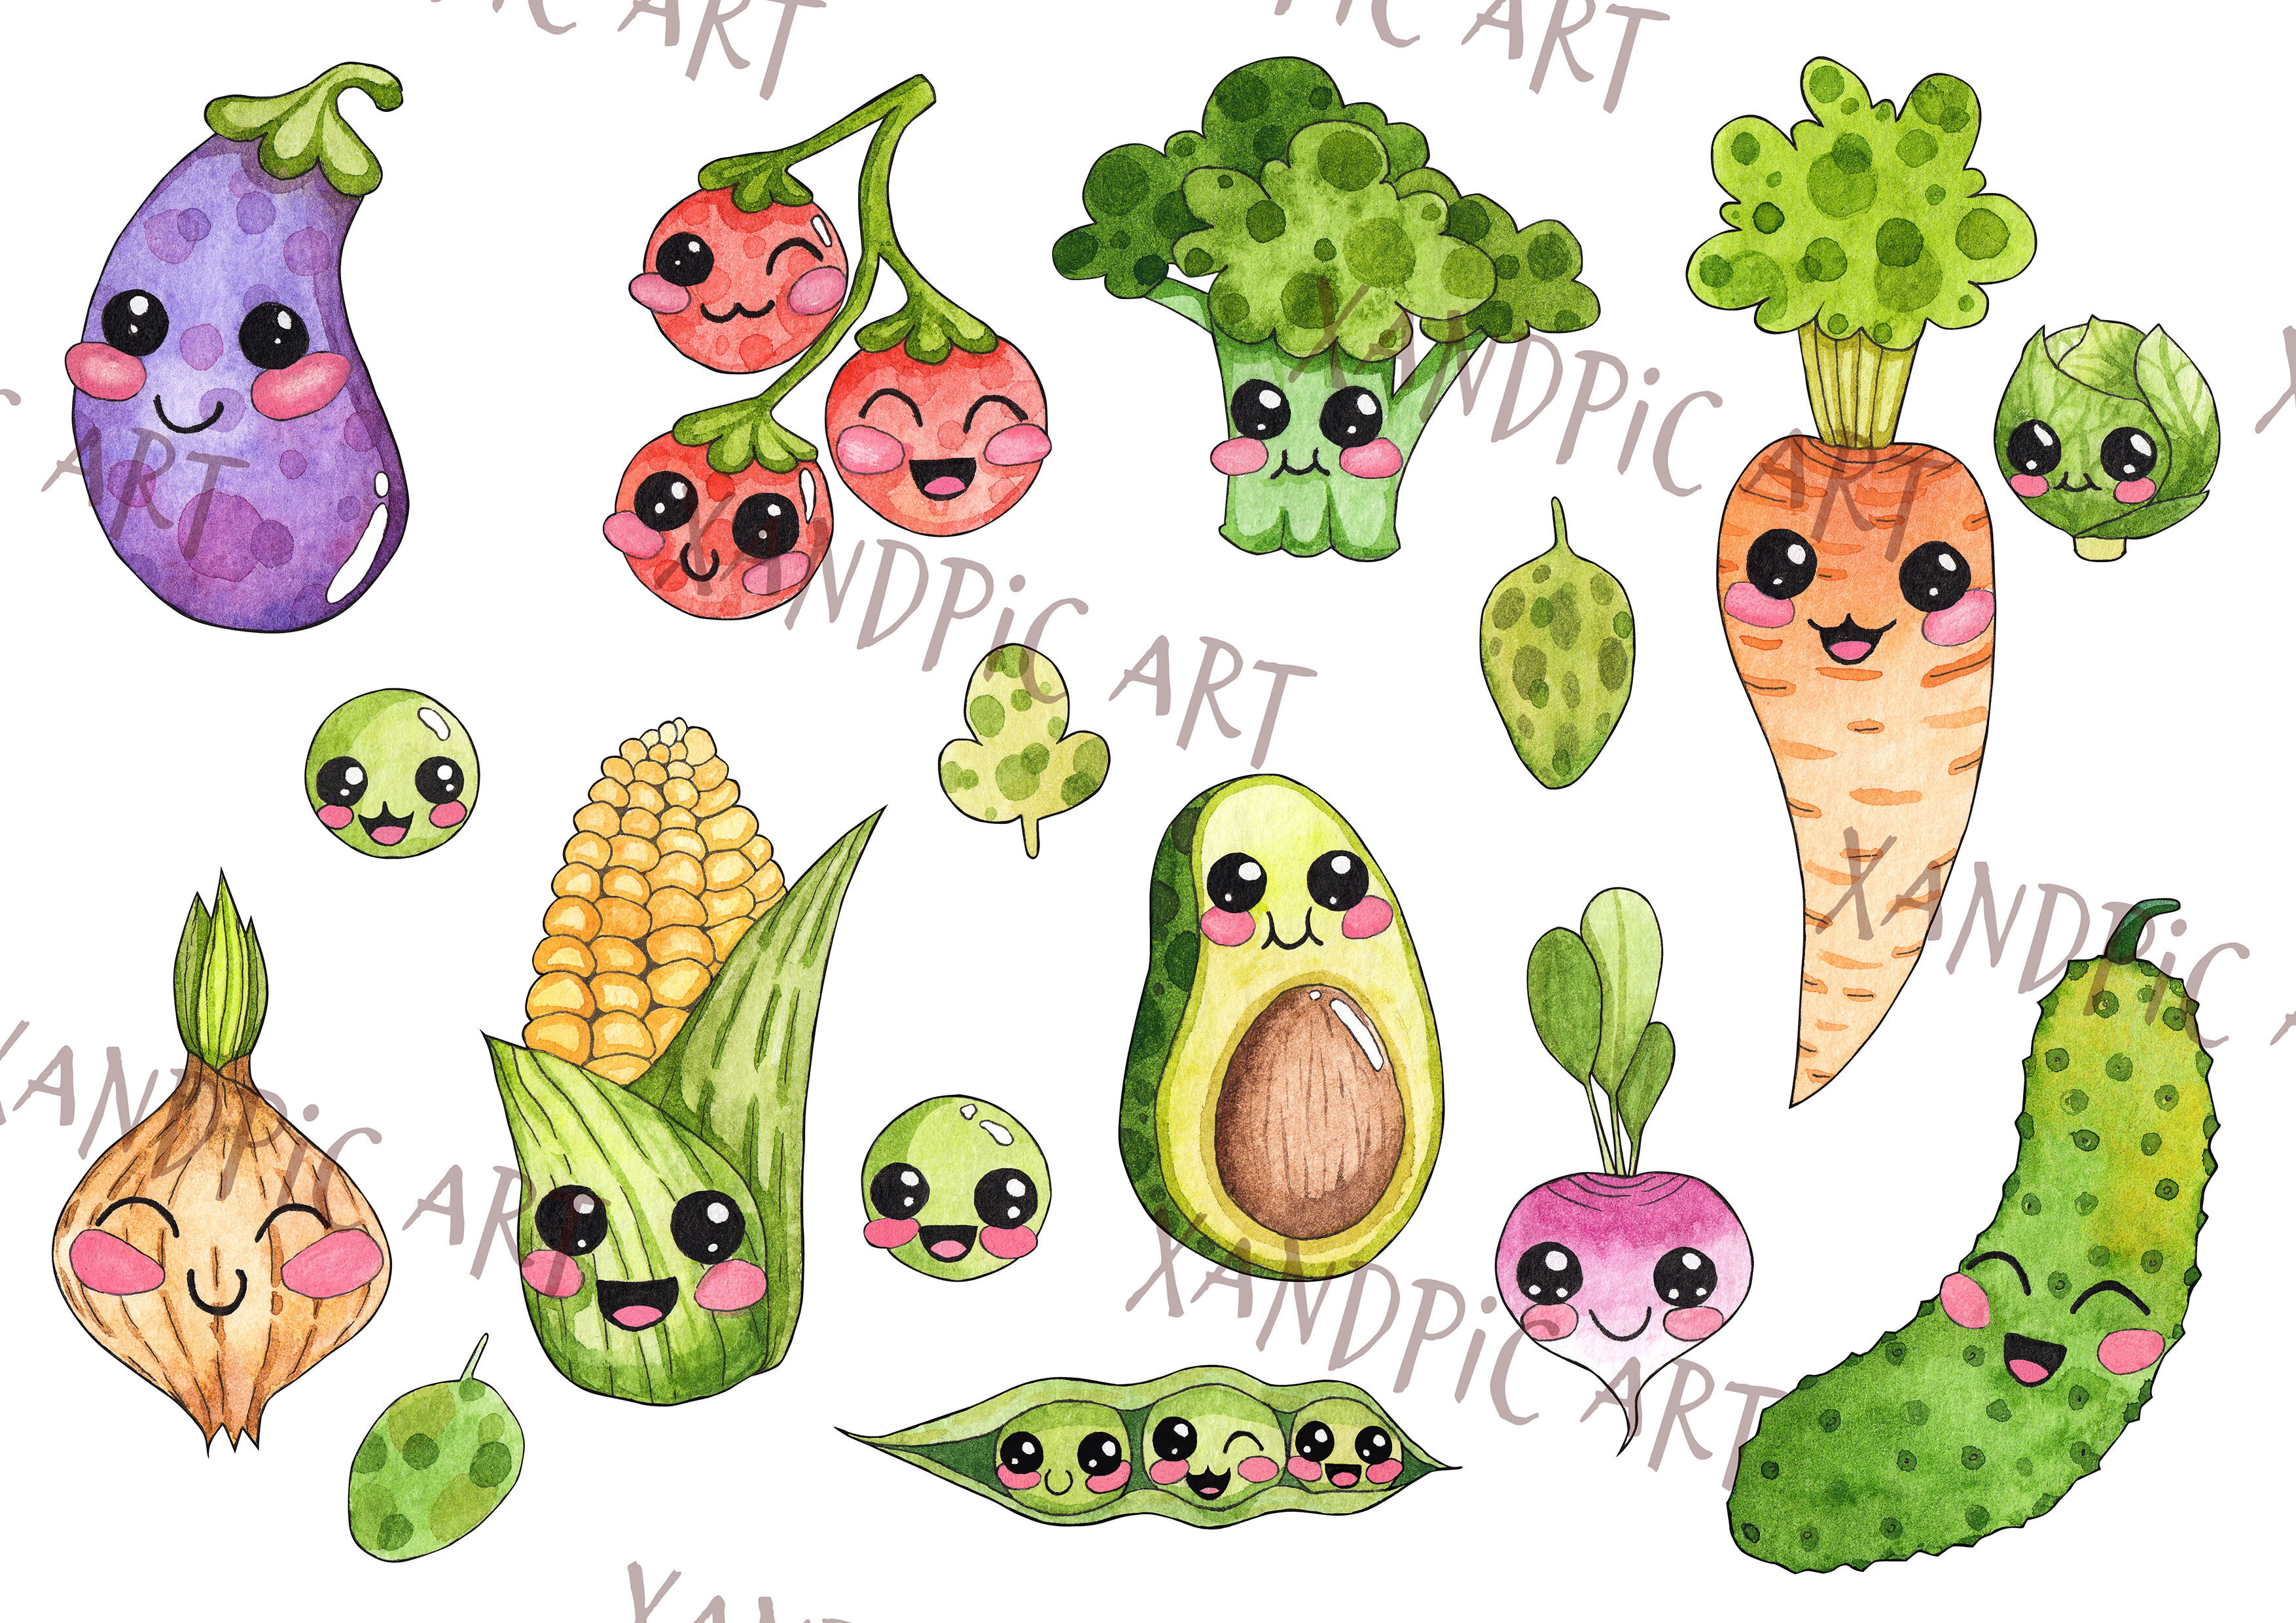 Kawaii Vegetables Clipartwatercolor hand drawing. Cute vegetables By